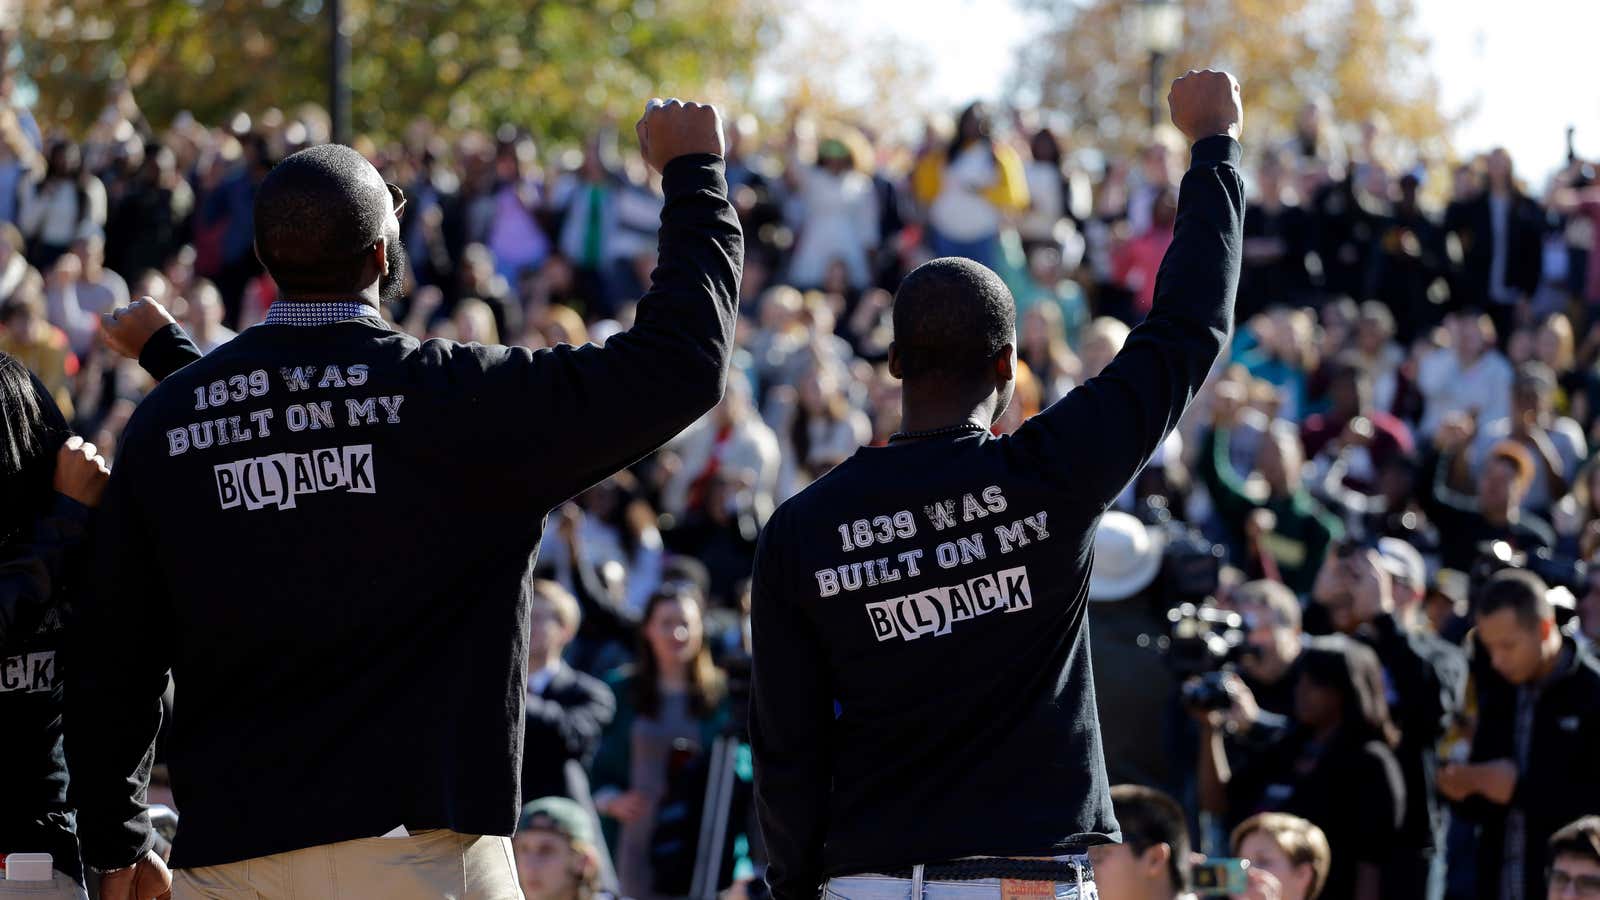 The “1839” on the shirts of these students demonstrators at the University of Missouri is a reference to slave labor in the school’s founding year.